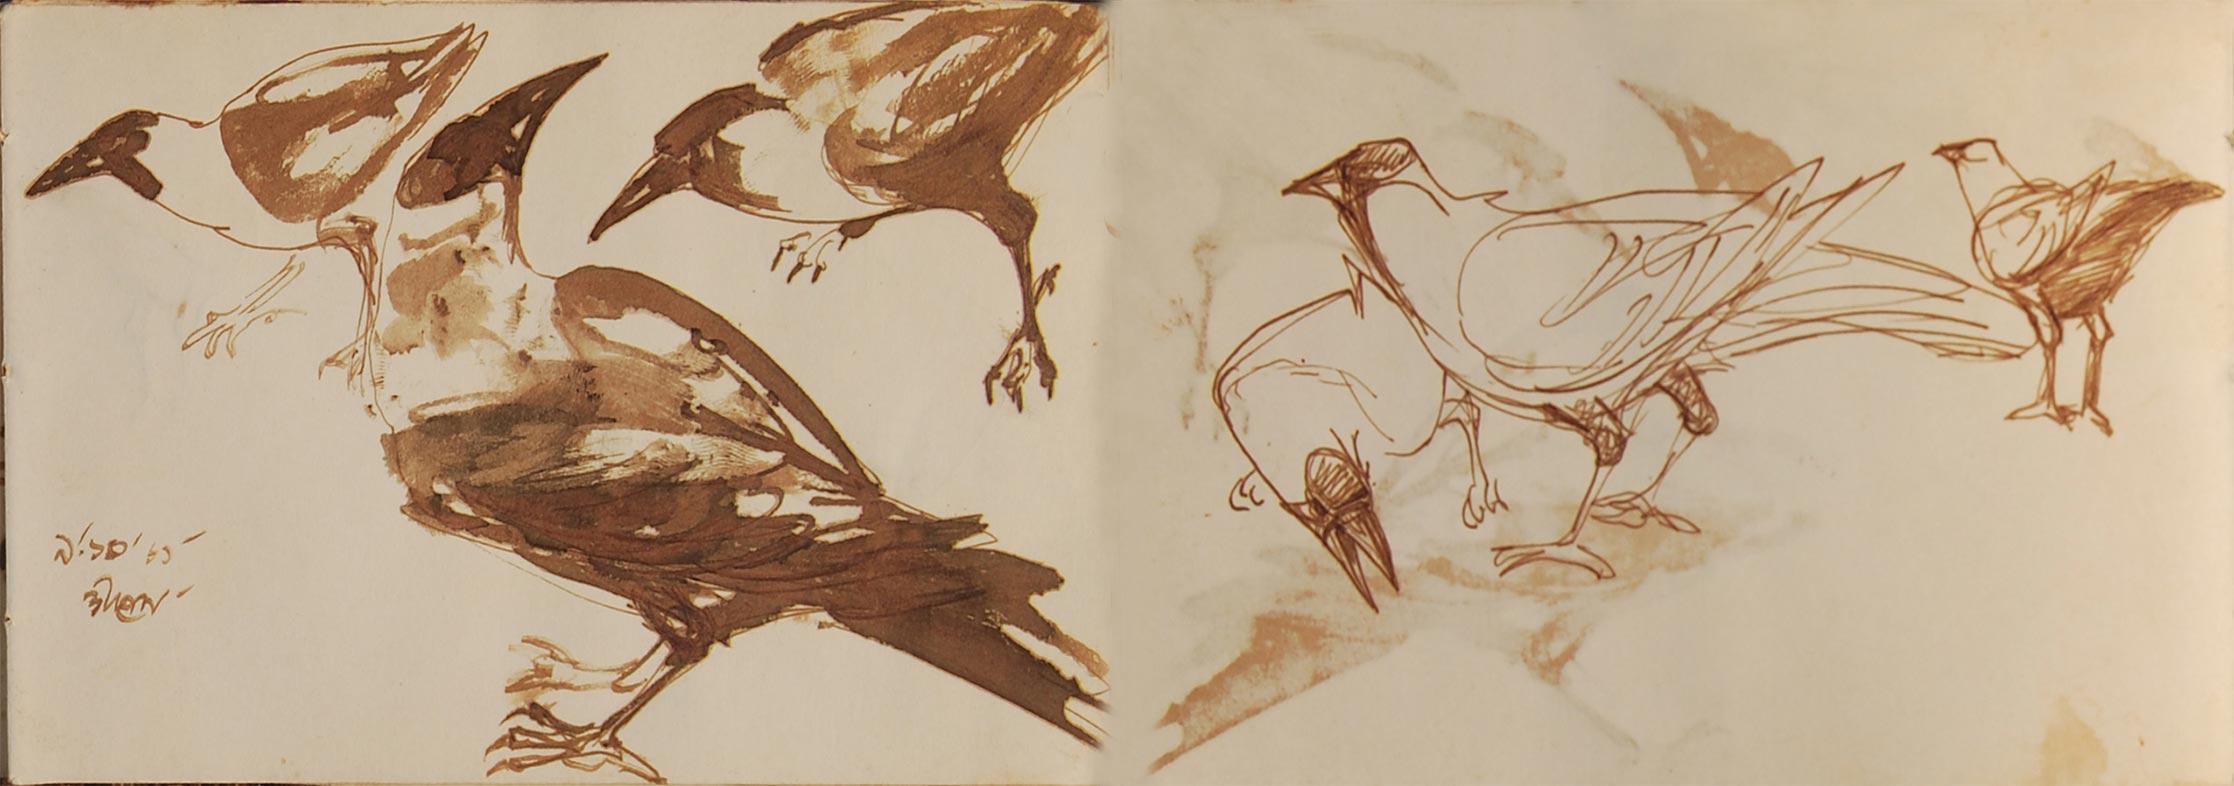 Crow Series, Brush, Watercolor on Paper, Two sided works, Bengal Artist